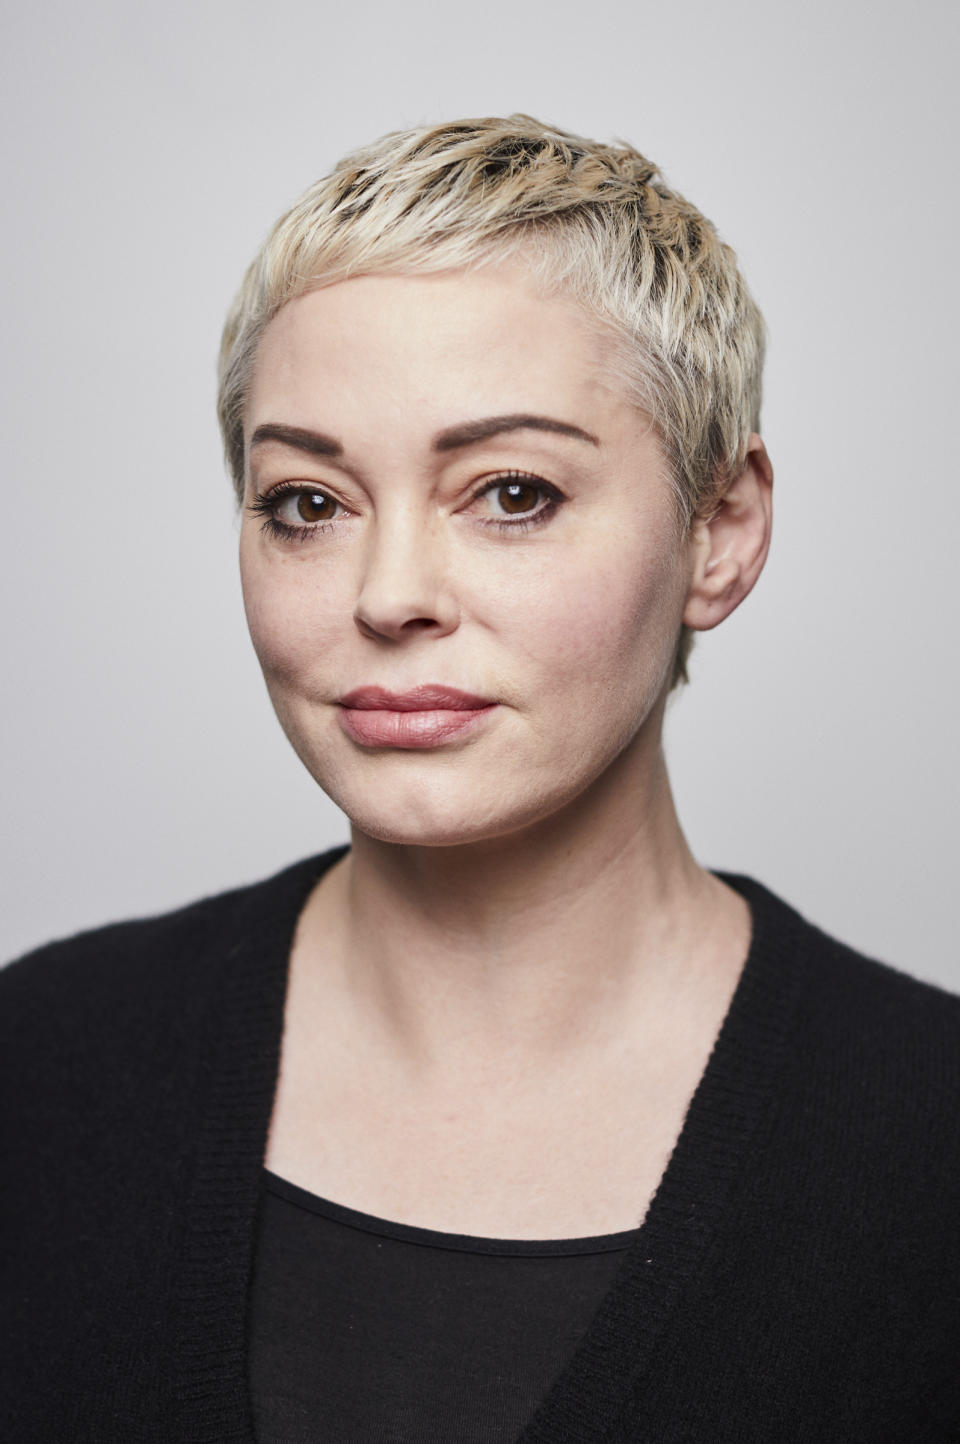 Rose McGowan poses for a portrait in New York on Friday, Jan. 3, 2020. McGowan doesn't plan be in the courtroom when Harvey Weinstein's sexual misconduct trial starts next week: One of Weinstein's most prominent accusers, McGowan says the trauma the fallen Hollywood mogul caused her is so great she couldn't bear the pain of it. McGowan has accused Weinstein of raping her more than 20 years ago and destroying her career; Weinstein has denied her claims. Since the allegations against Weinstein sparked the #MeToo movement, she has emerged as a vigorous advocate for sexual assault victims.(Photo by Matt Licari/Invision/AP)